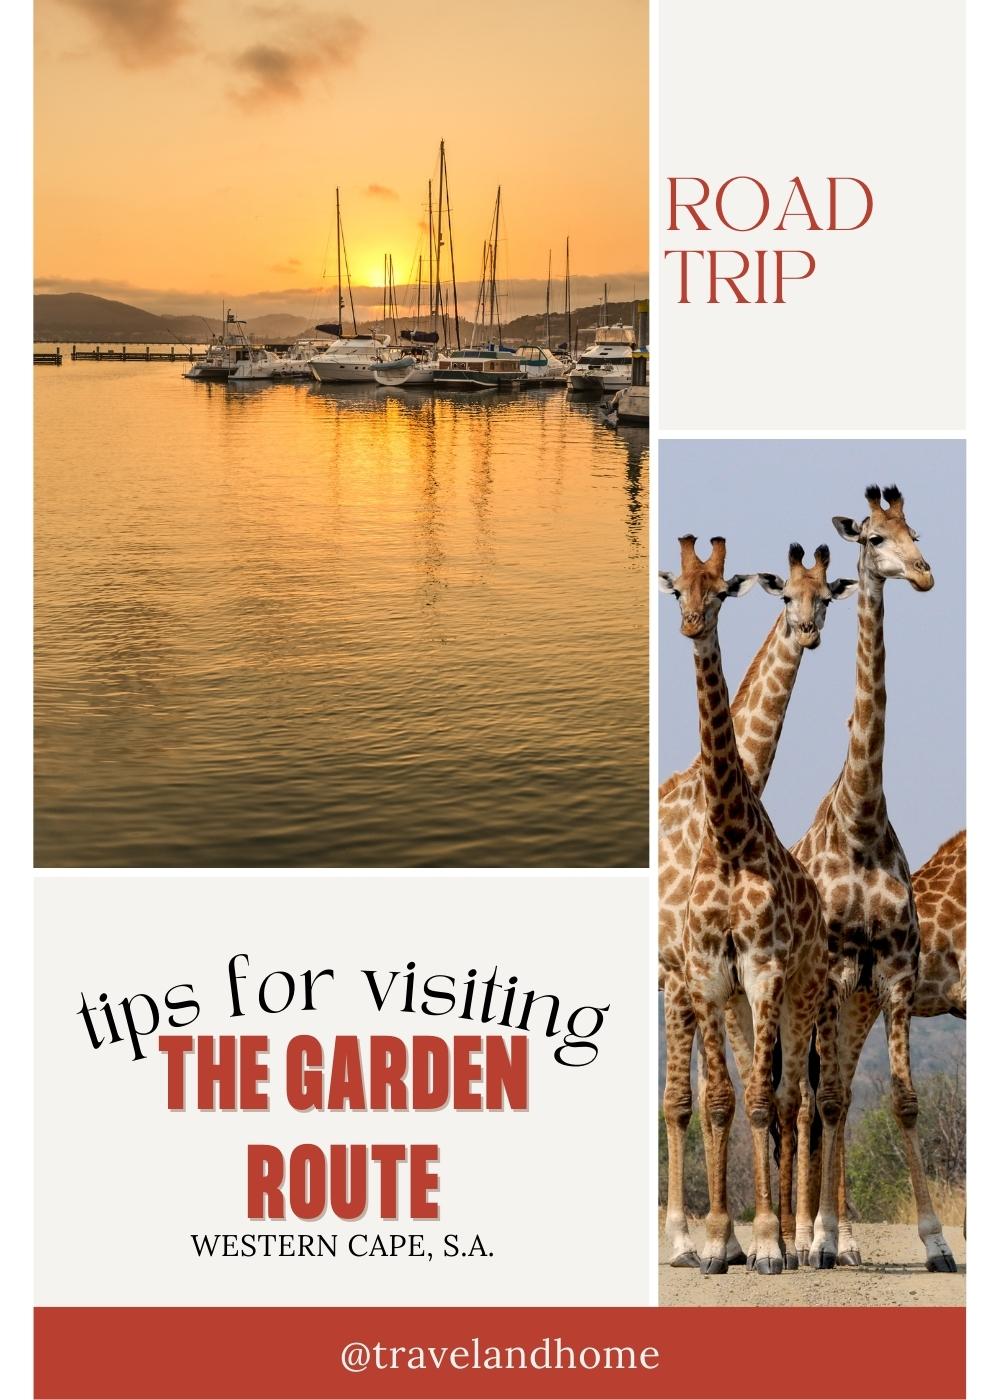 roadtrip itinerary where to go in the garden route south africa travel and home